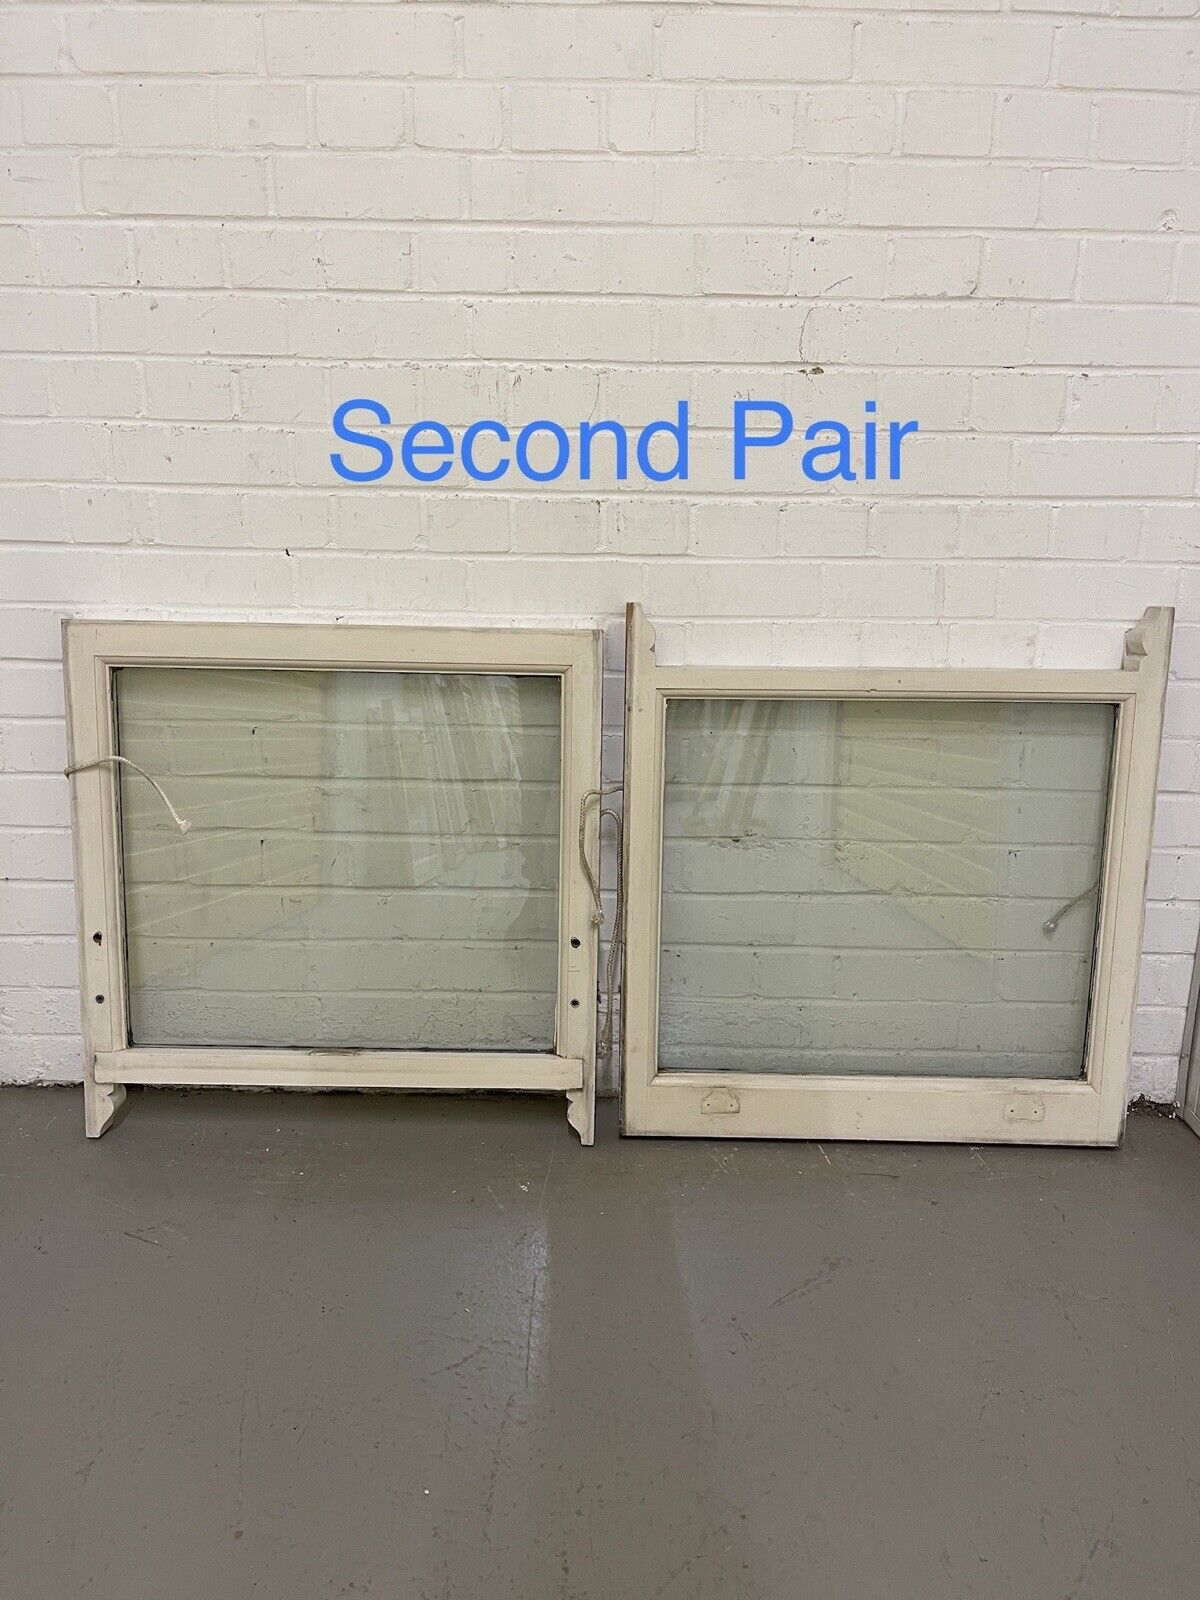 Two Pairs Of Double Glazed Wooden Sash Windows 683x690 680x713 684x690 680x715mm